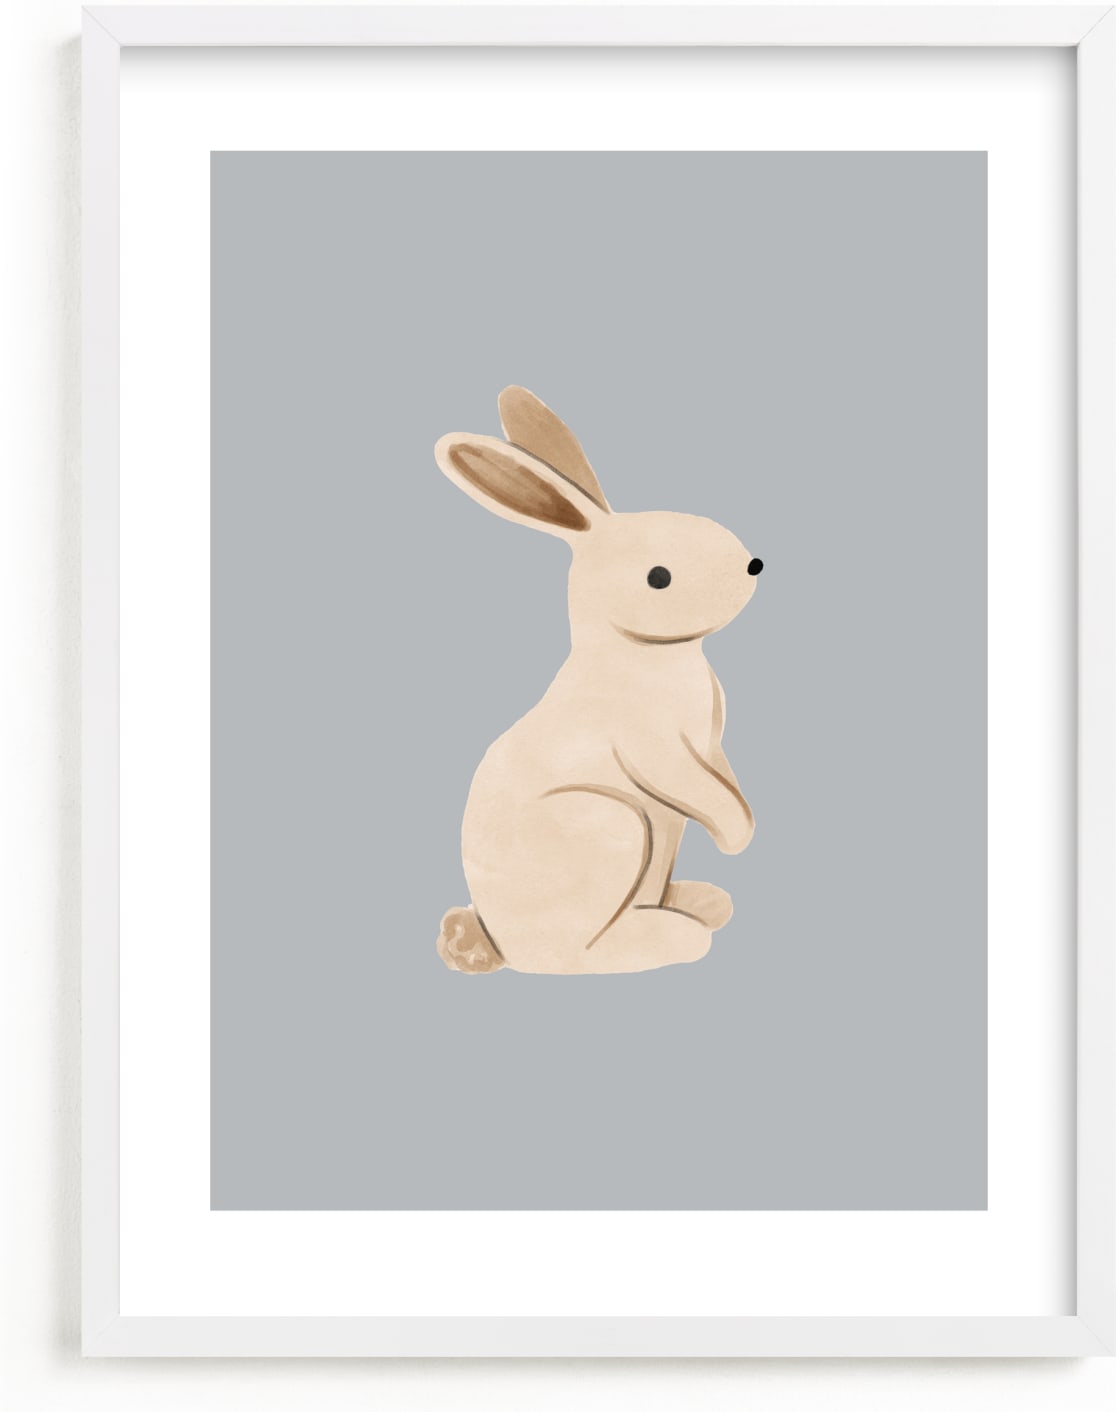 This is a blue, brown, grey kids wall art by Vivian Yiwing called Baby Rabbit.